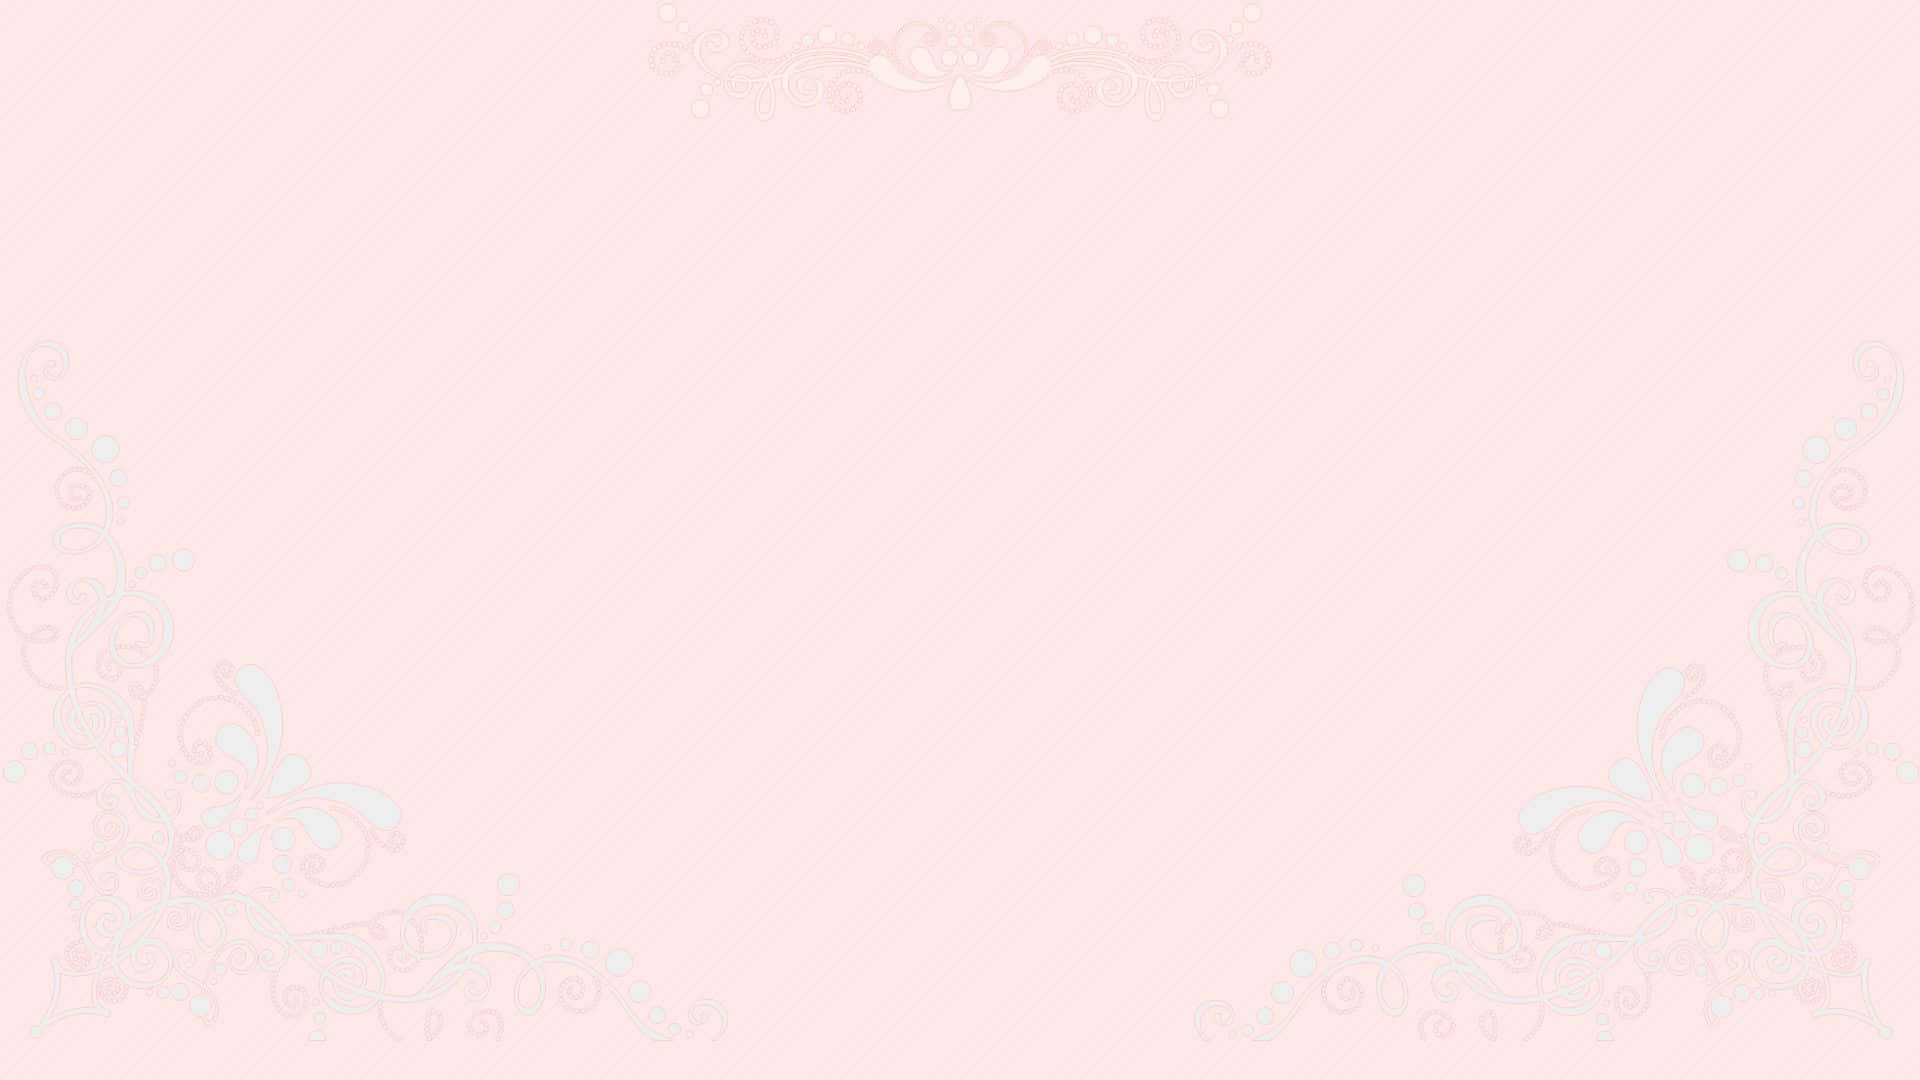 Pastel Minimalist Background - Serenity and Simplicity